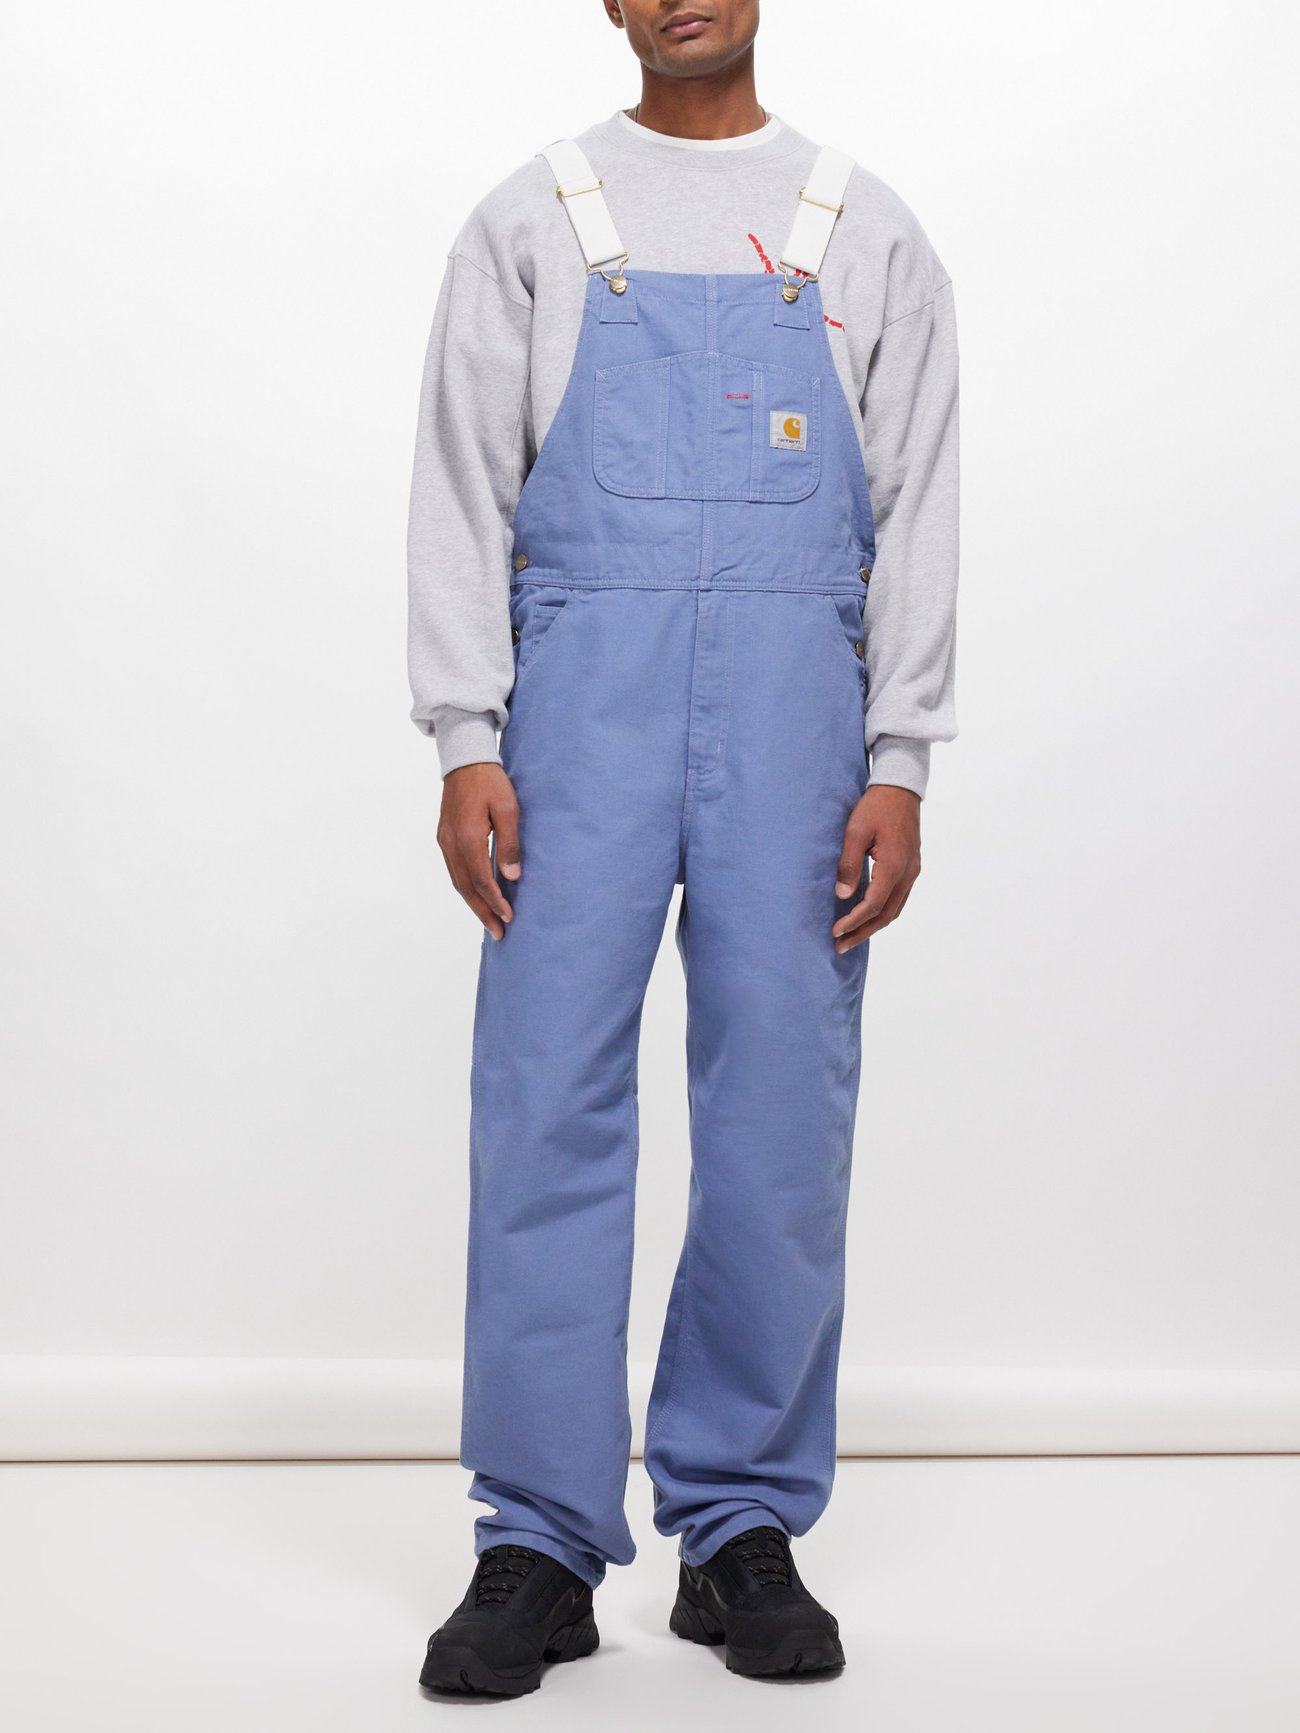 Carhartt WIP Is Home to New York's Most Wearable Workwear